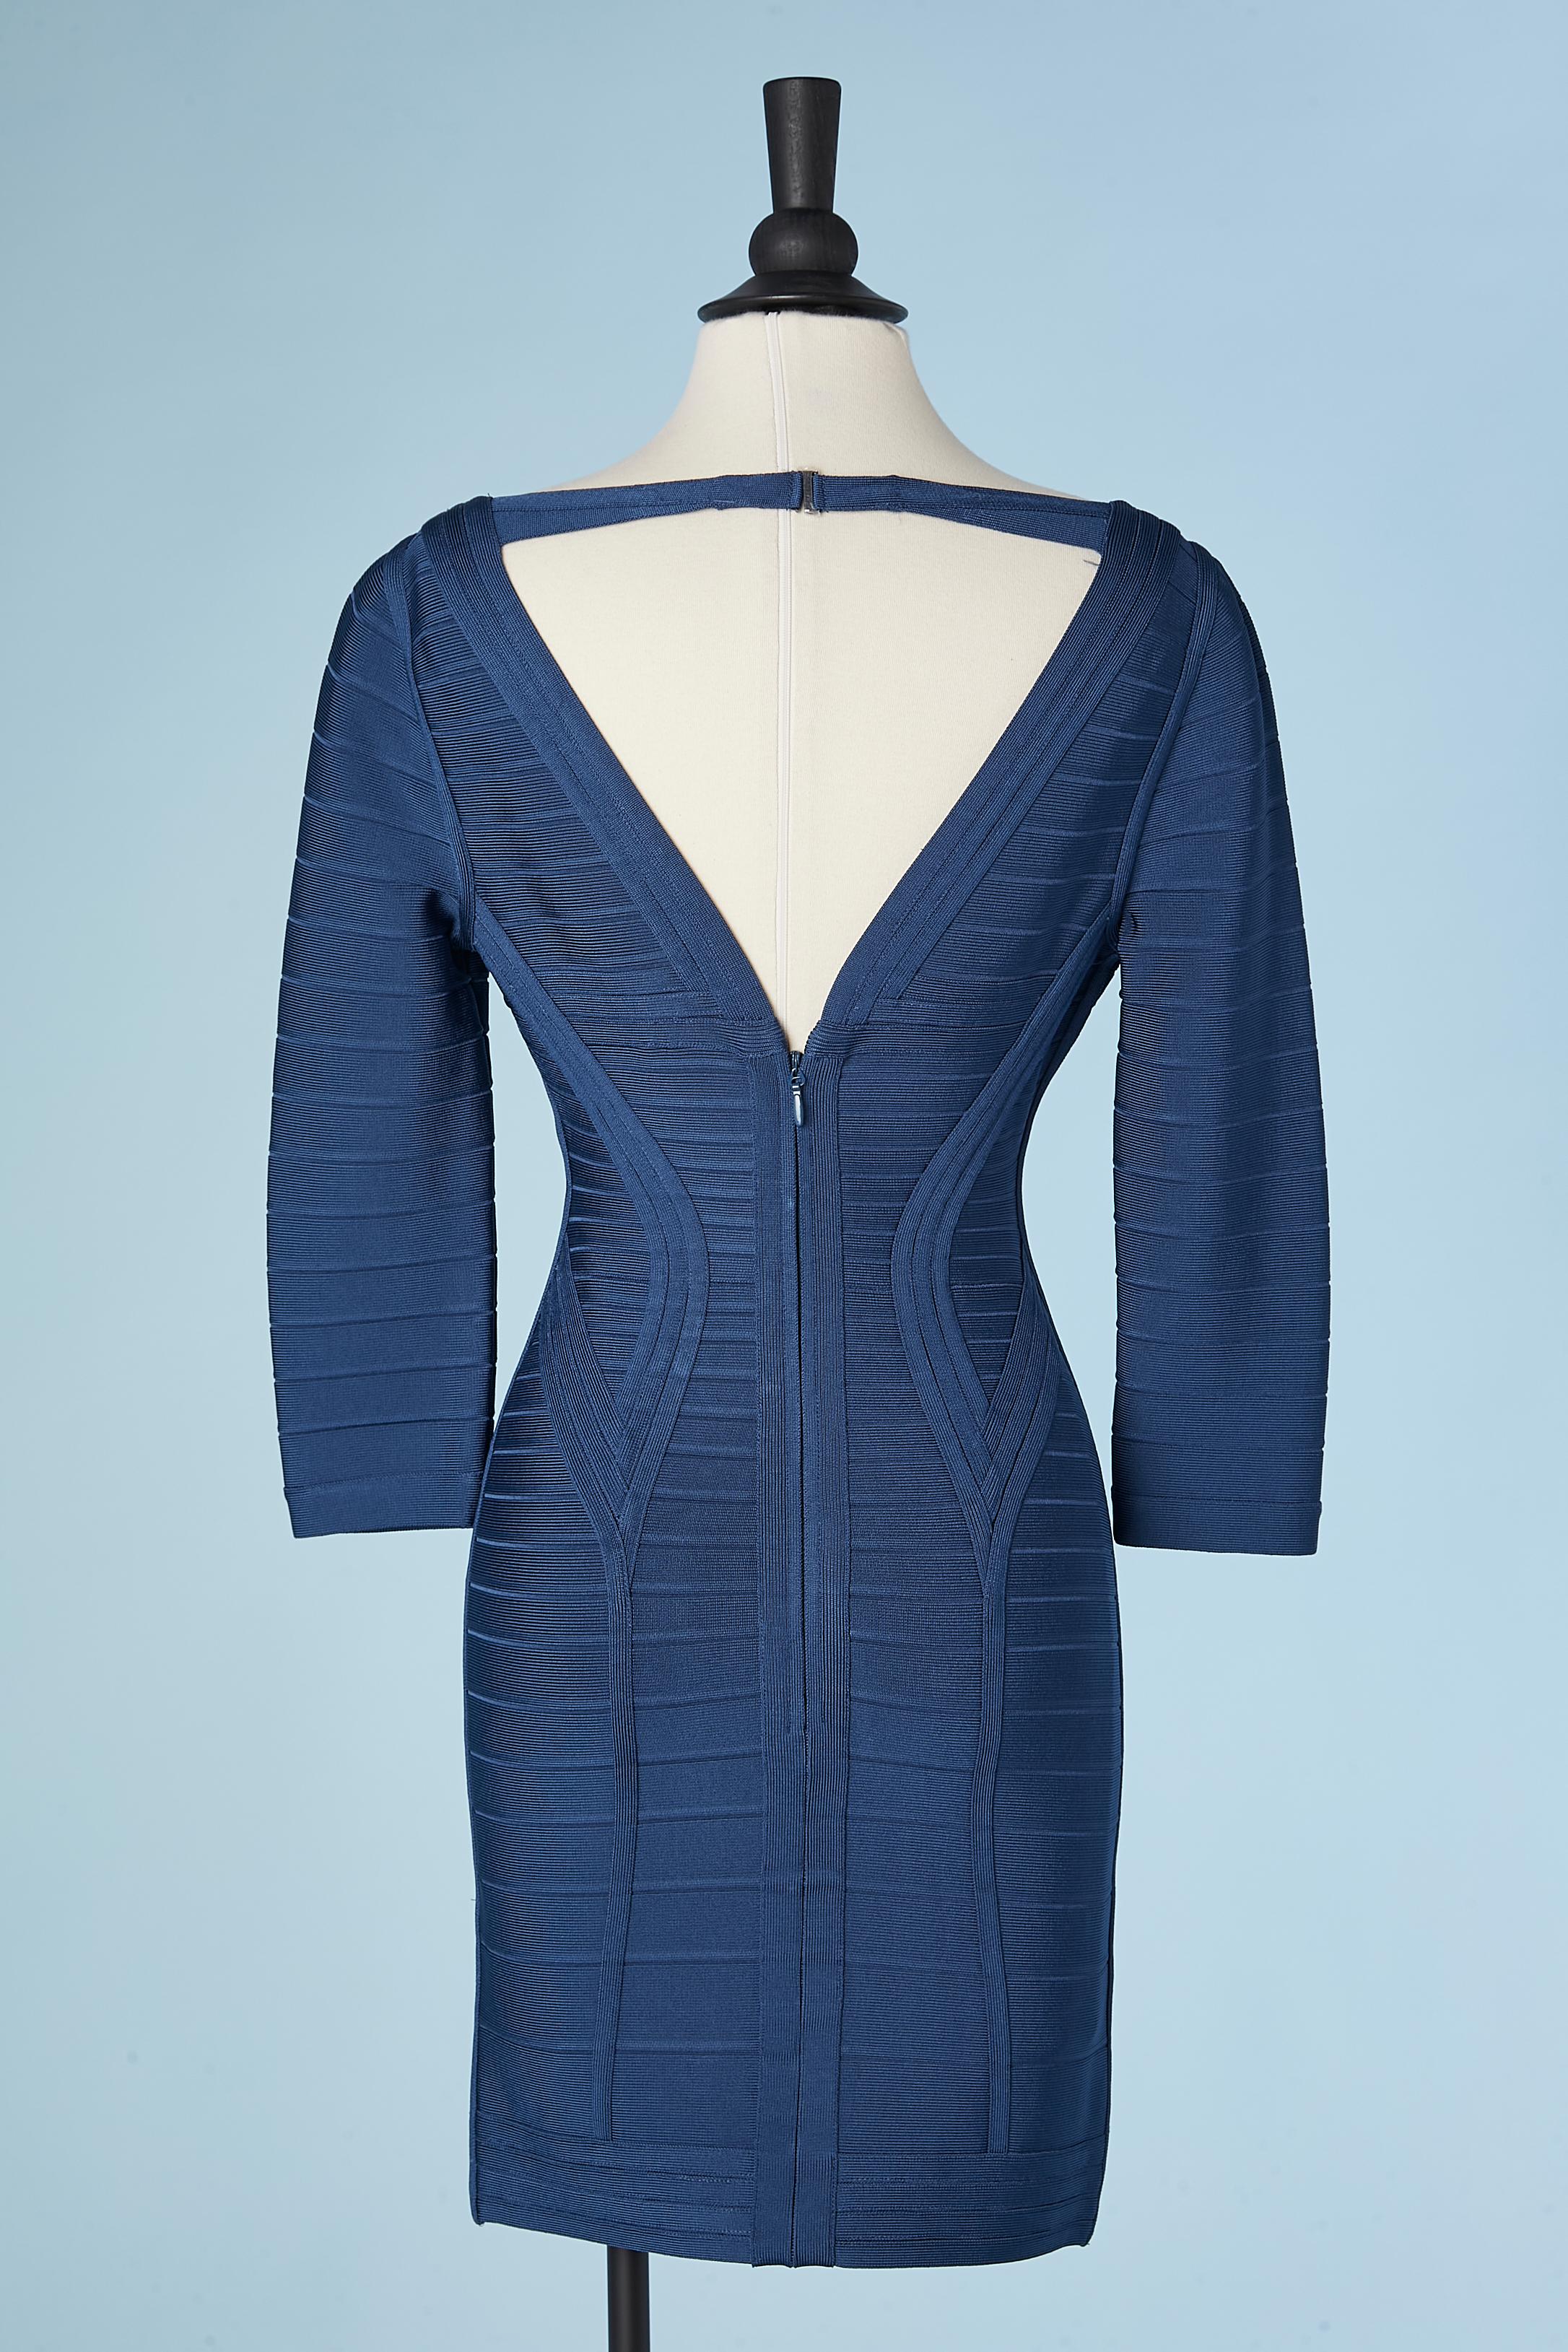 Blue rayon knit cocktail dress with strips Hervé Léger  For Sale 1